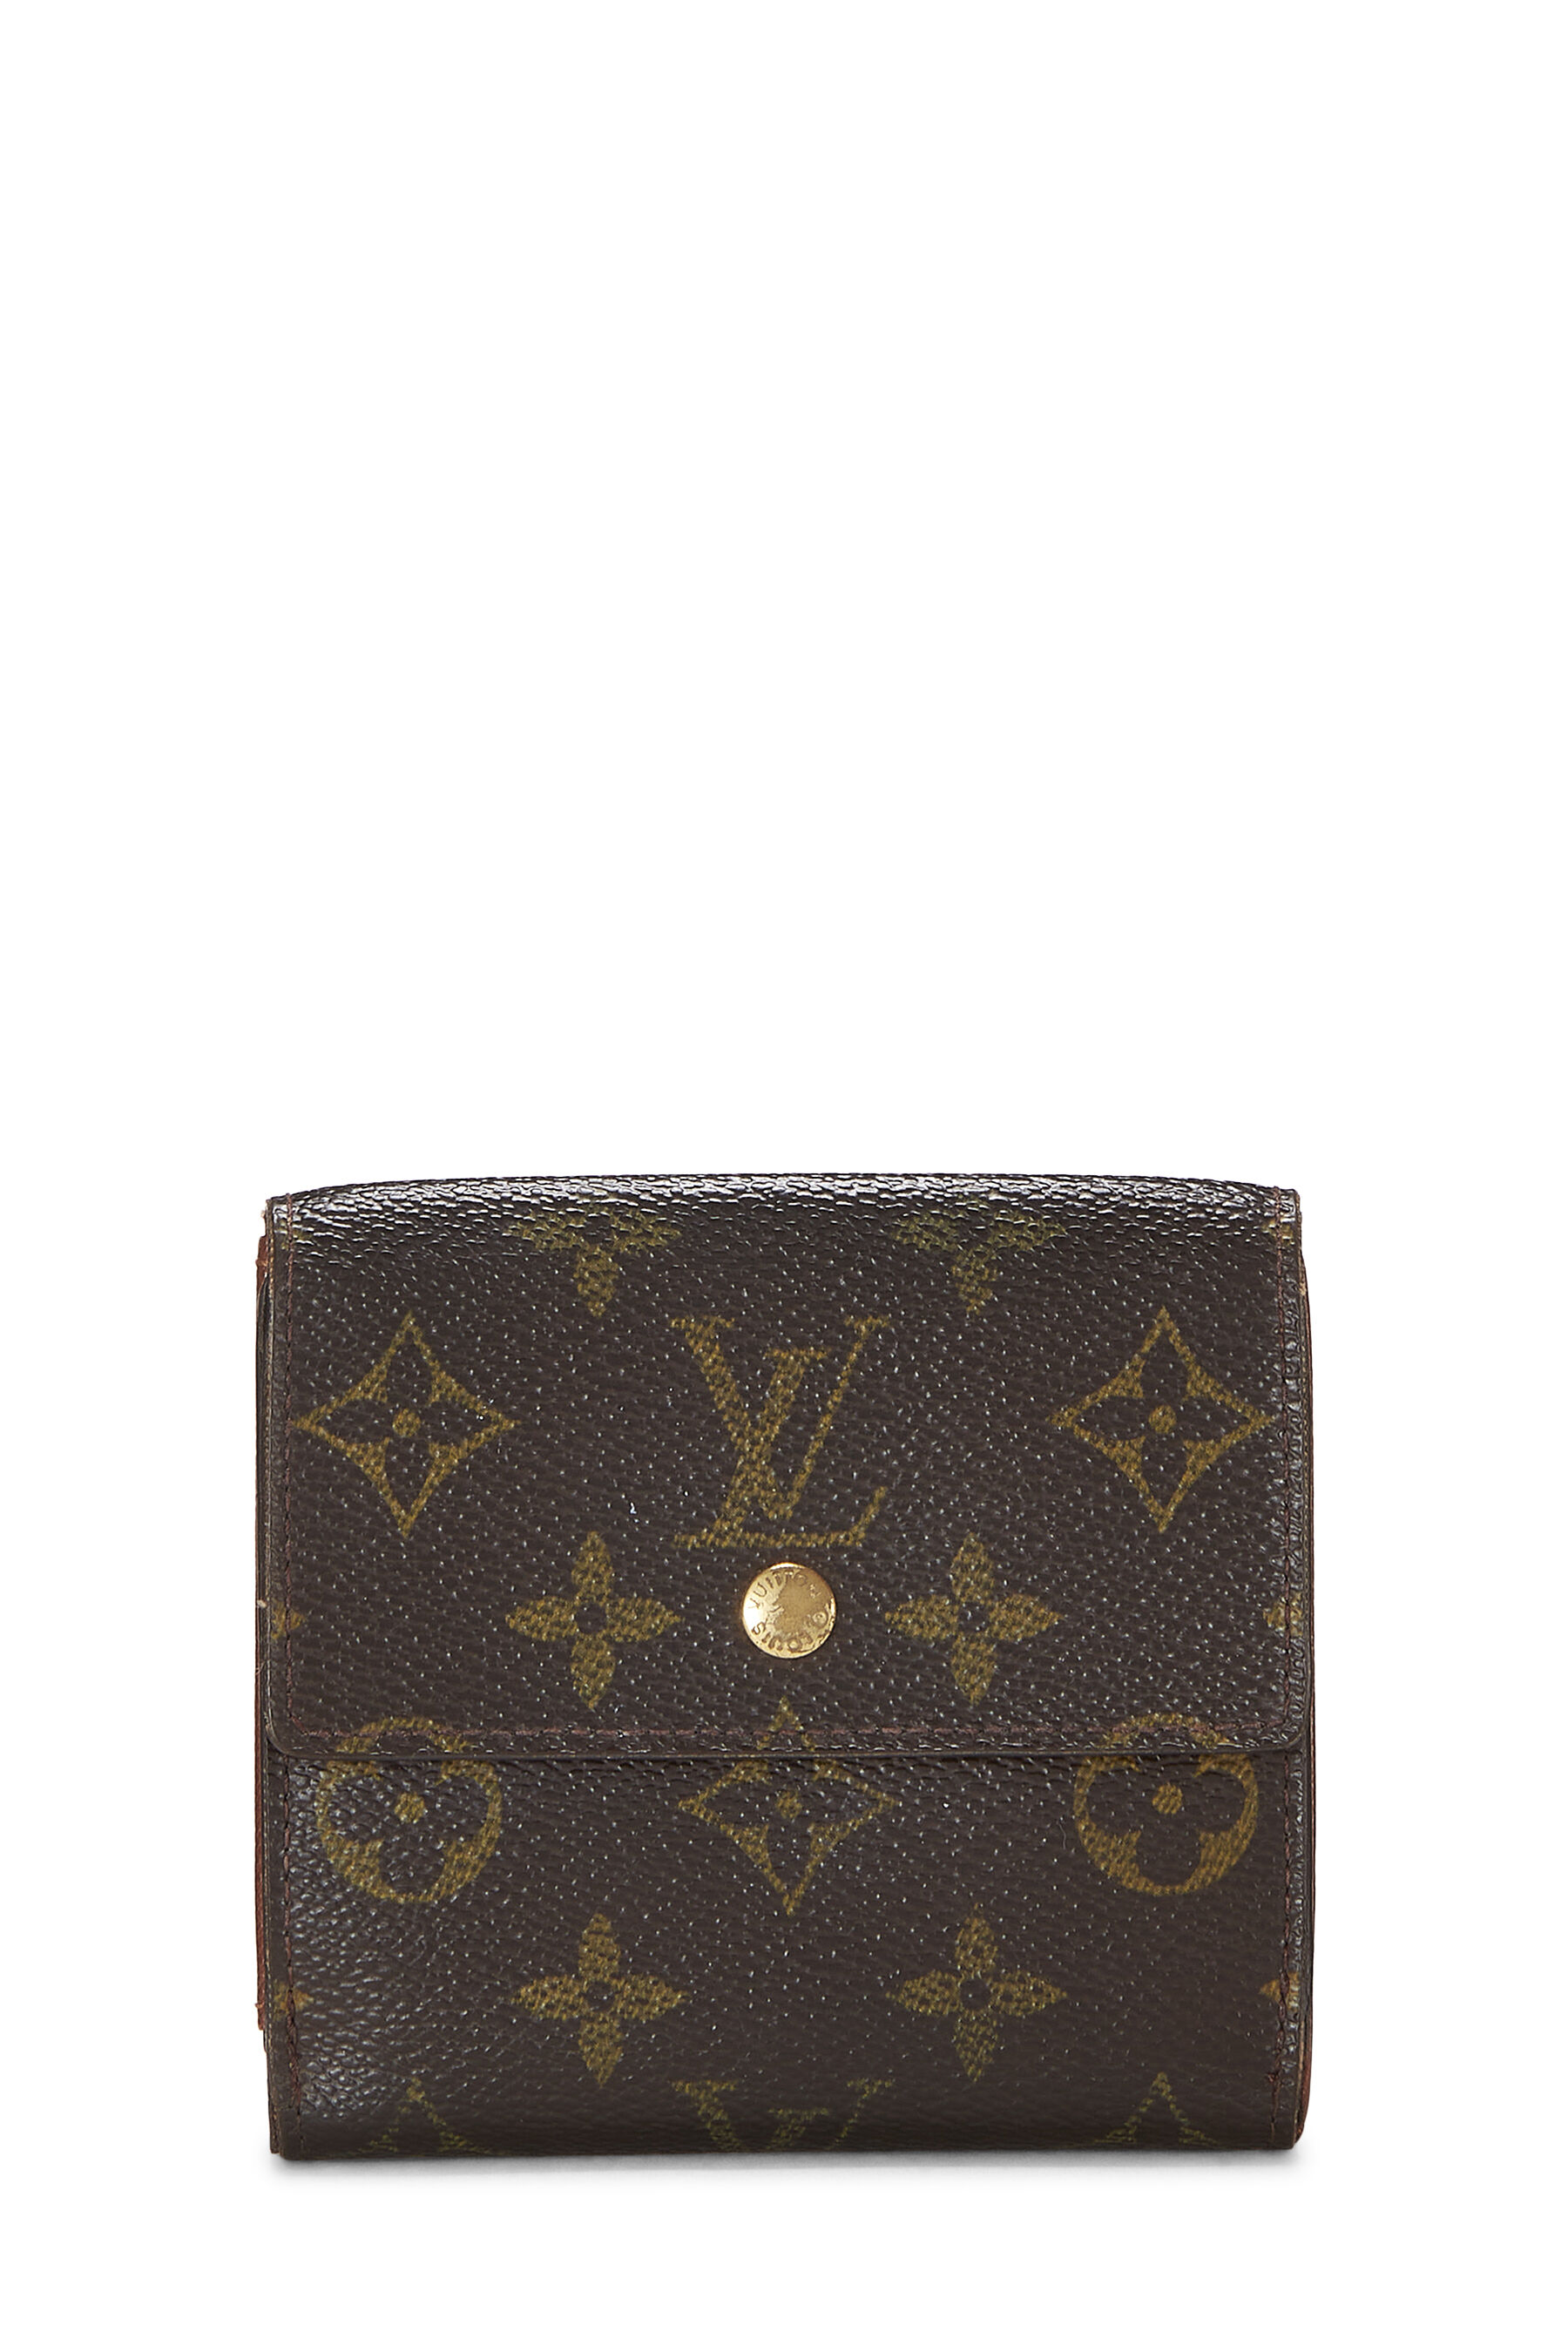 Buy Louis Vuitton Elysee Wallet Monogram Canvas and Leather 1870202